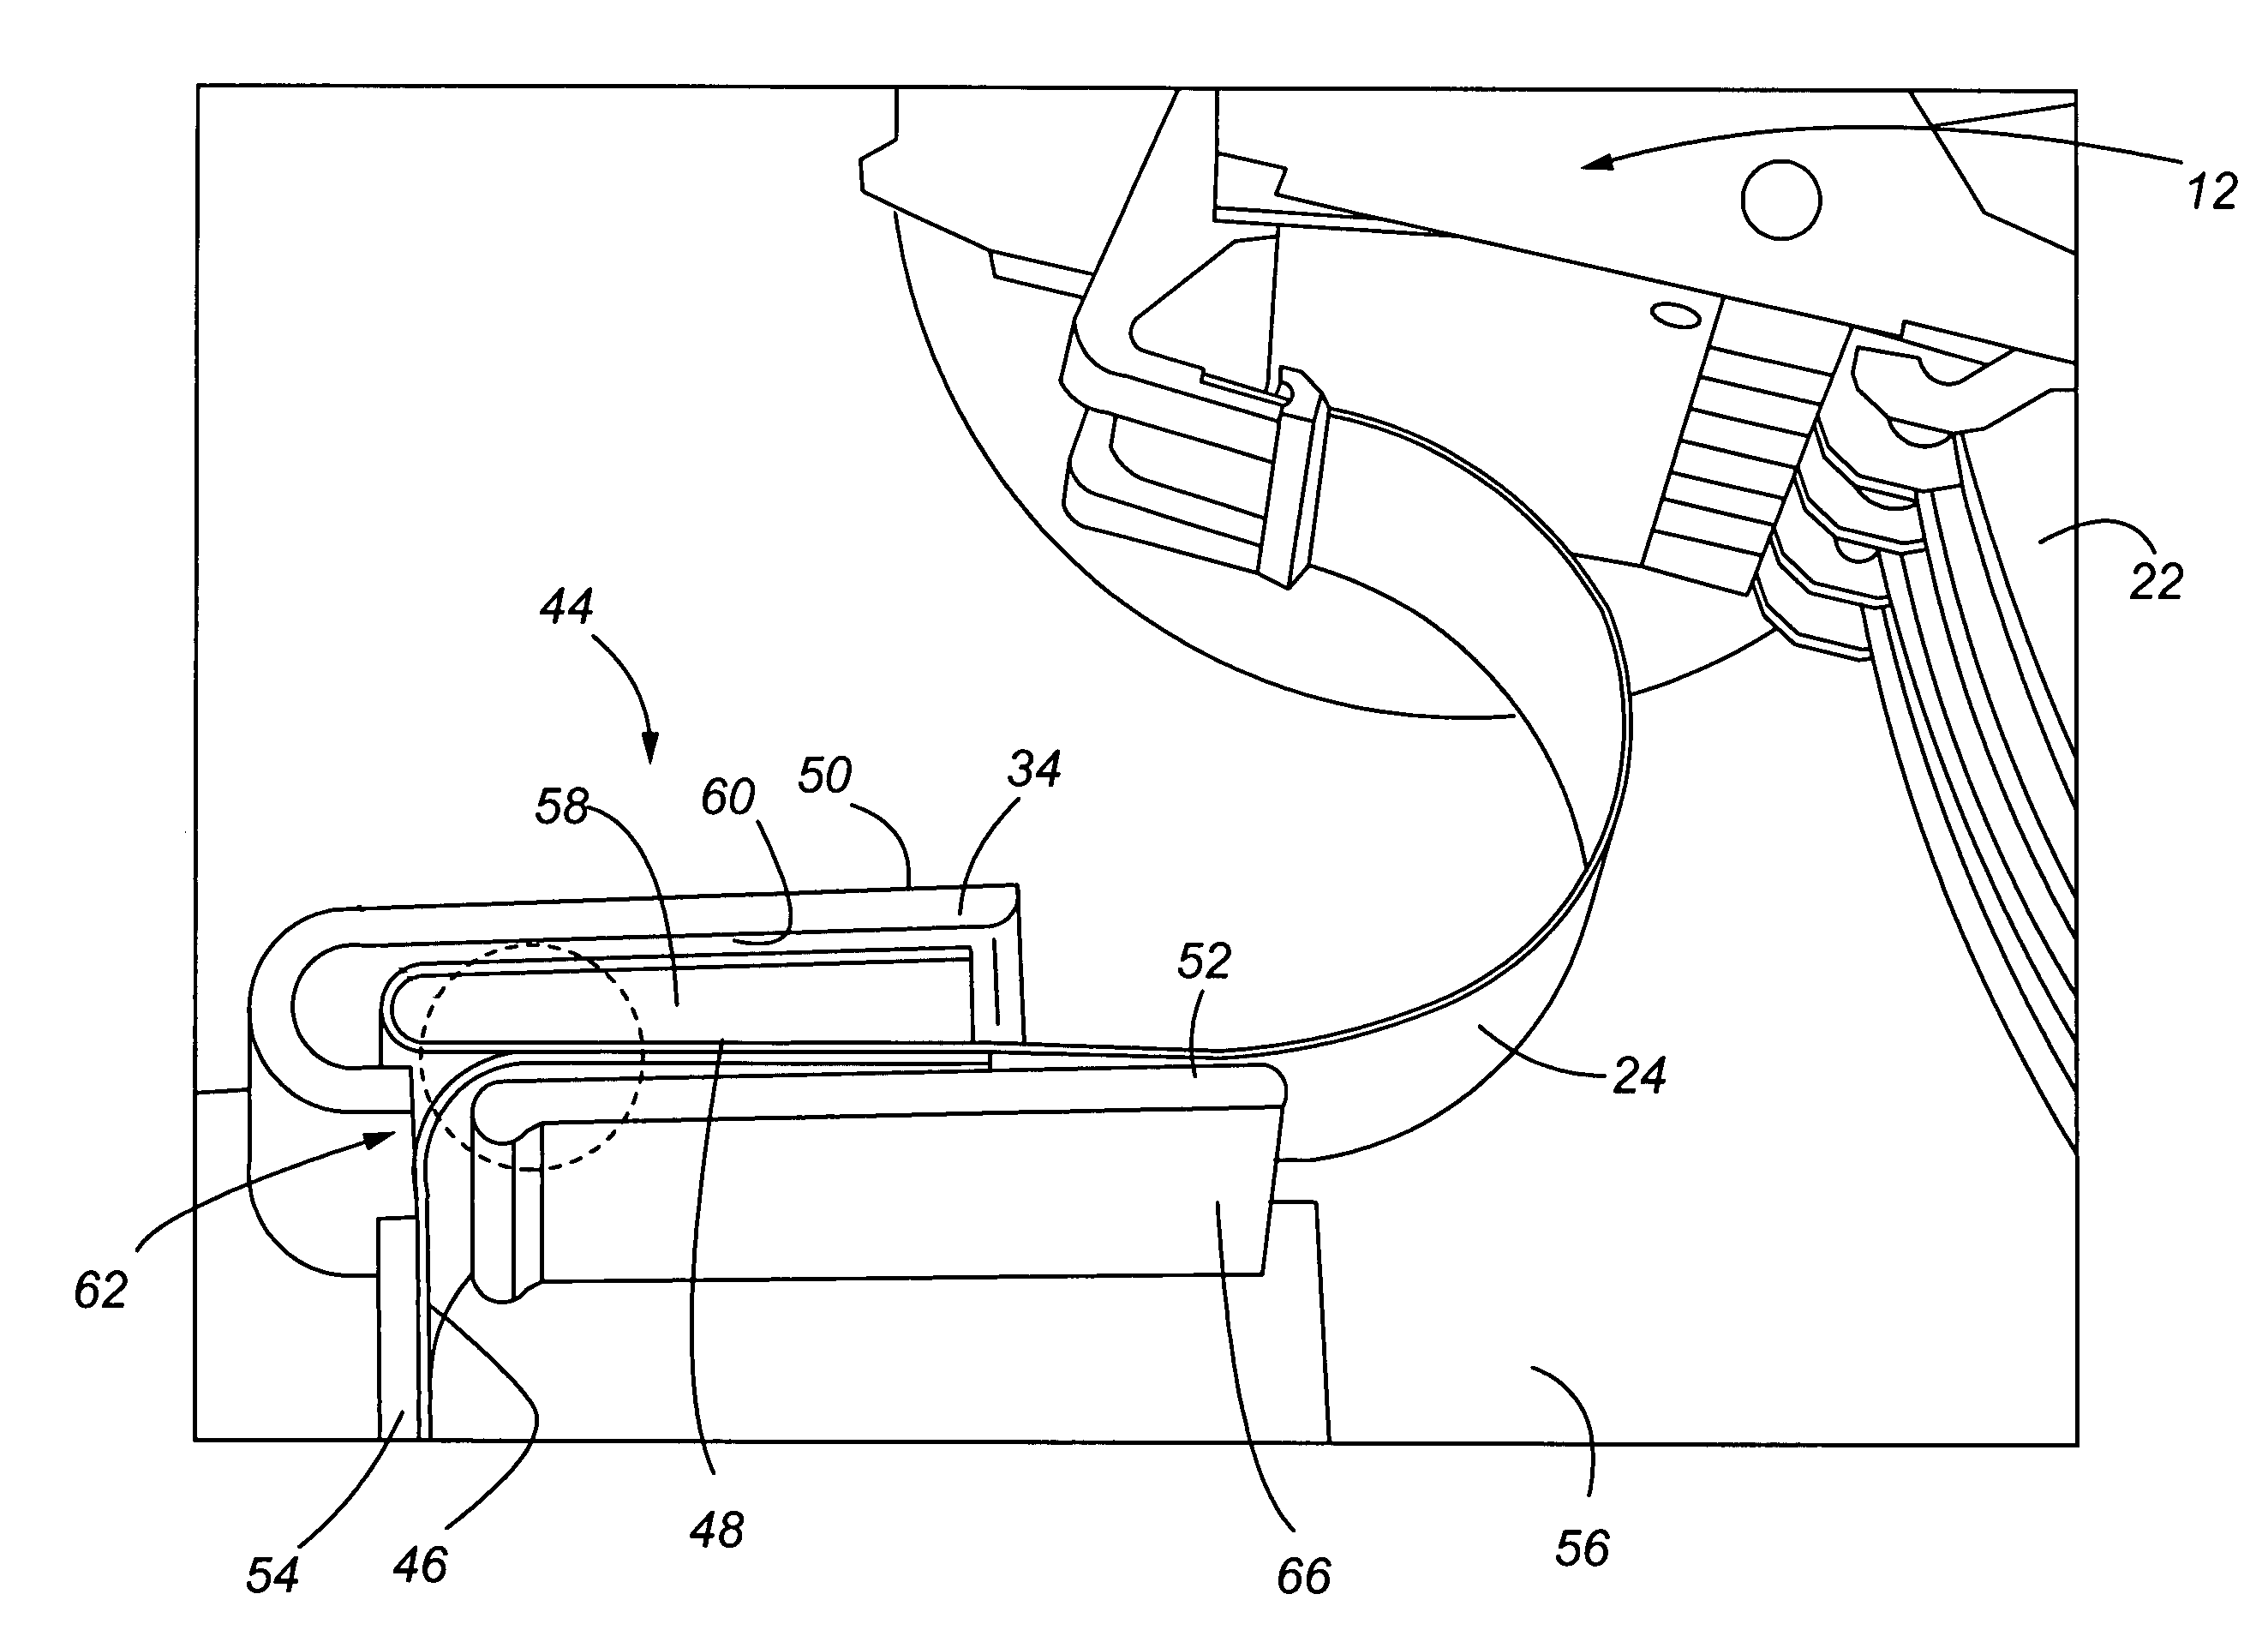 Flex circuit dampener for reduction of seek induced vibrations in a disk drive